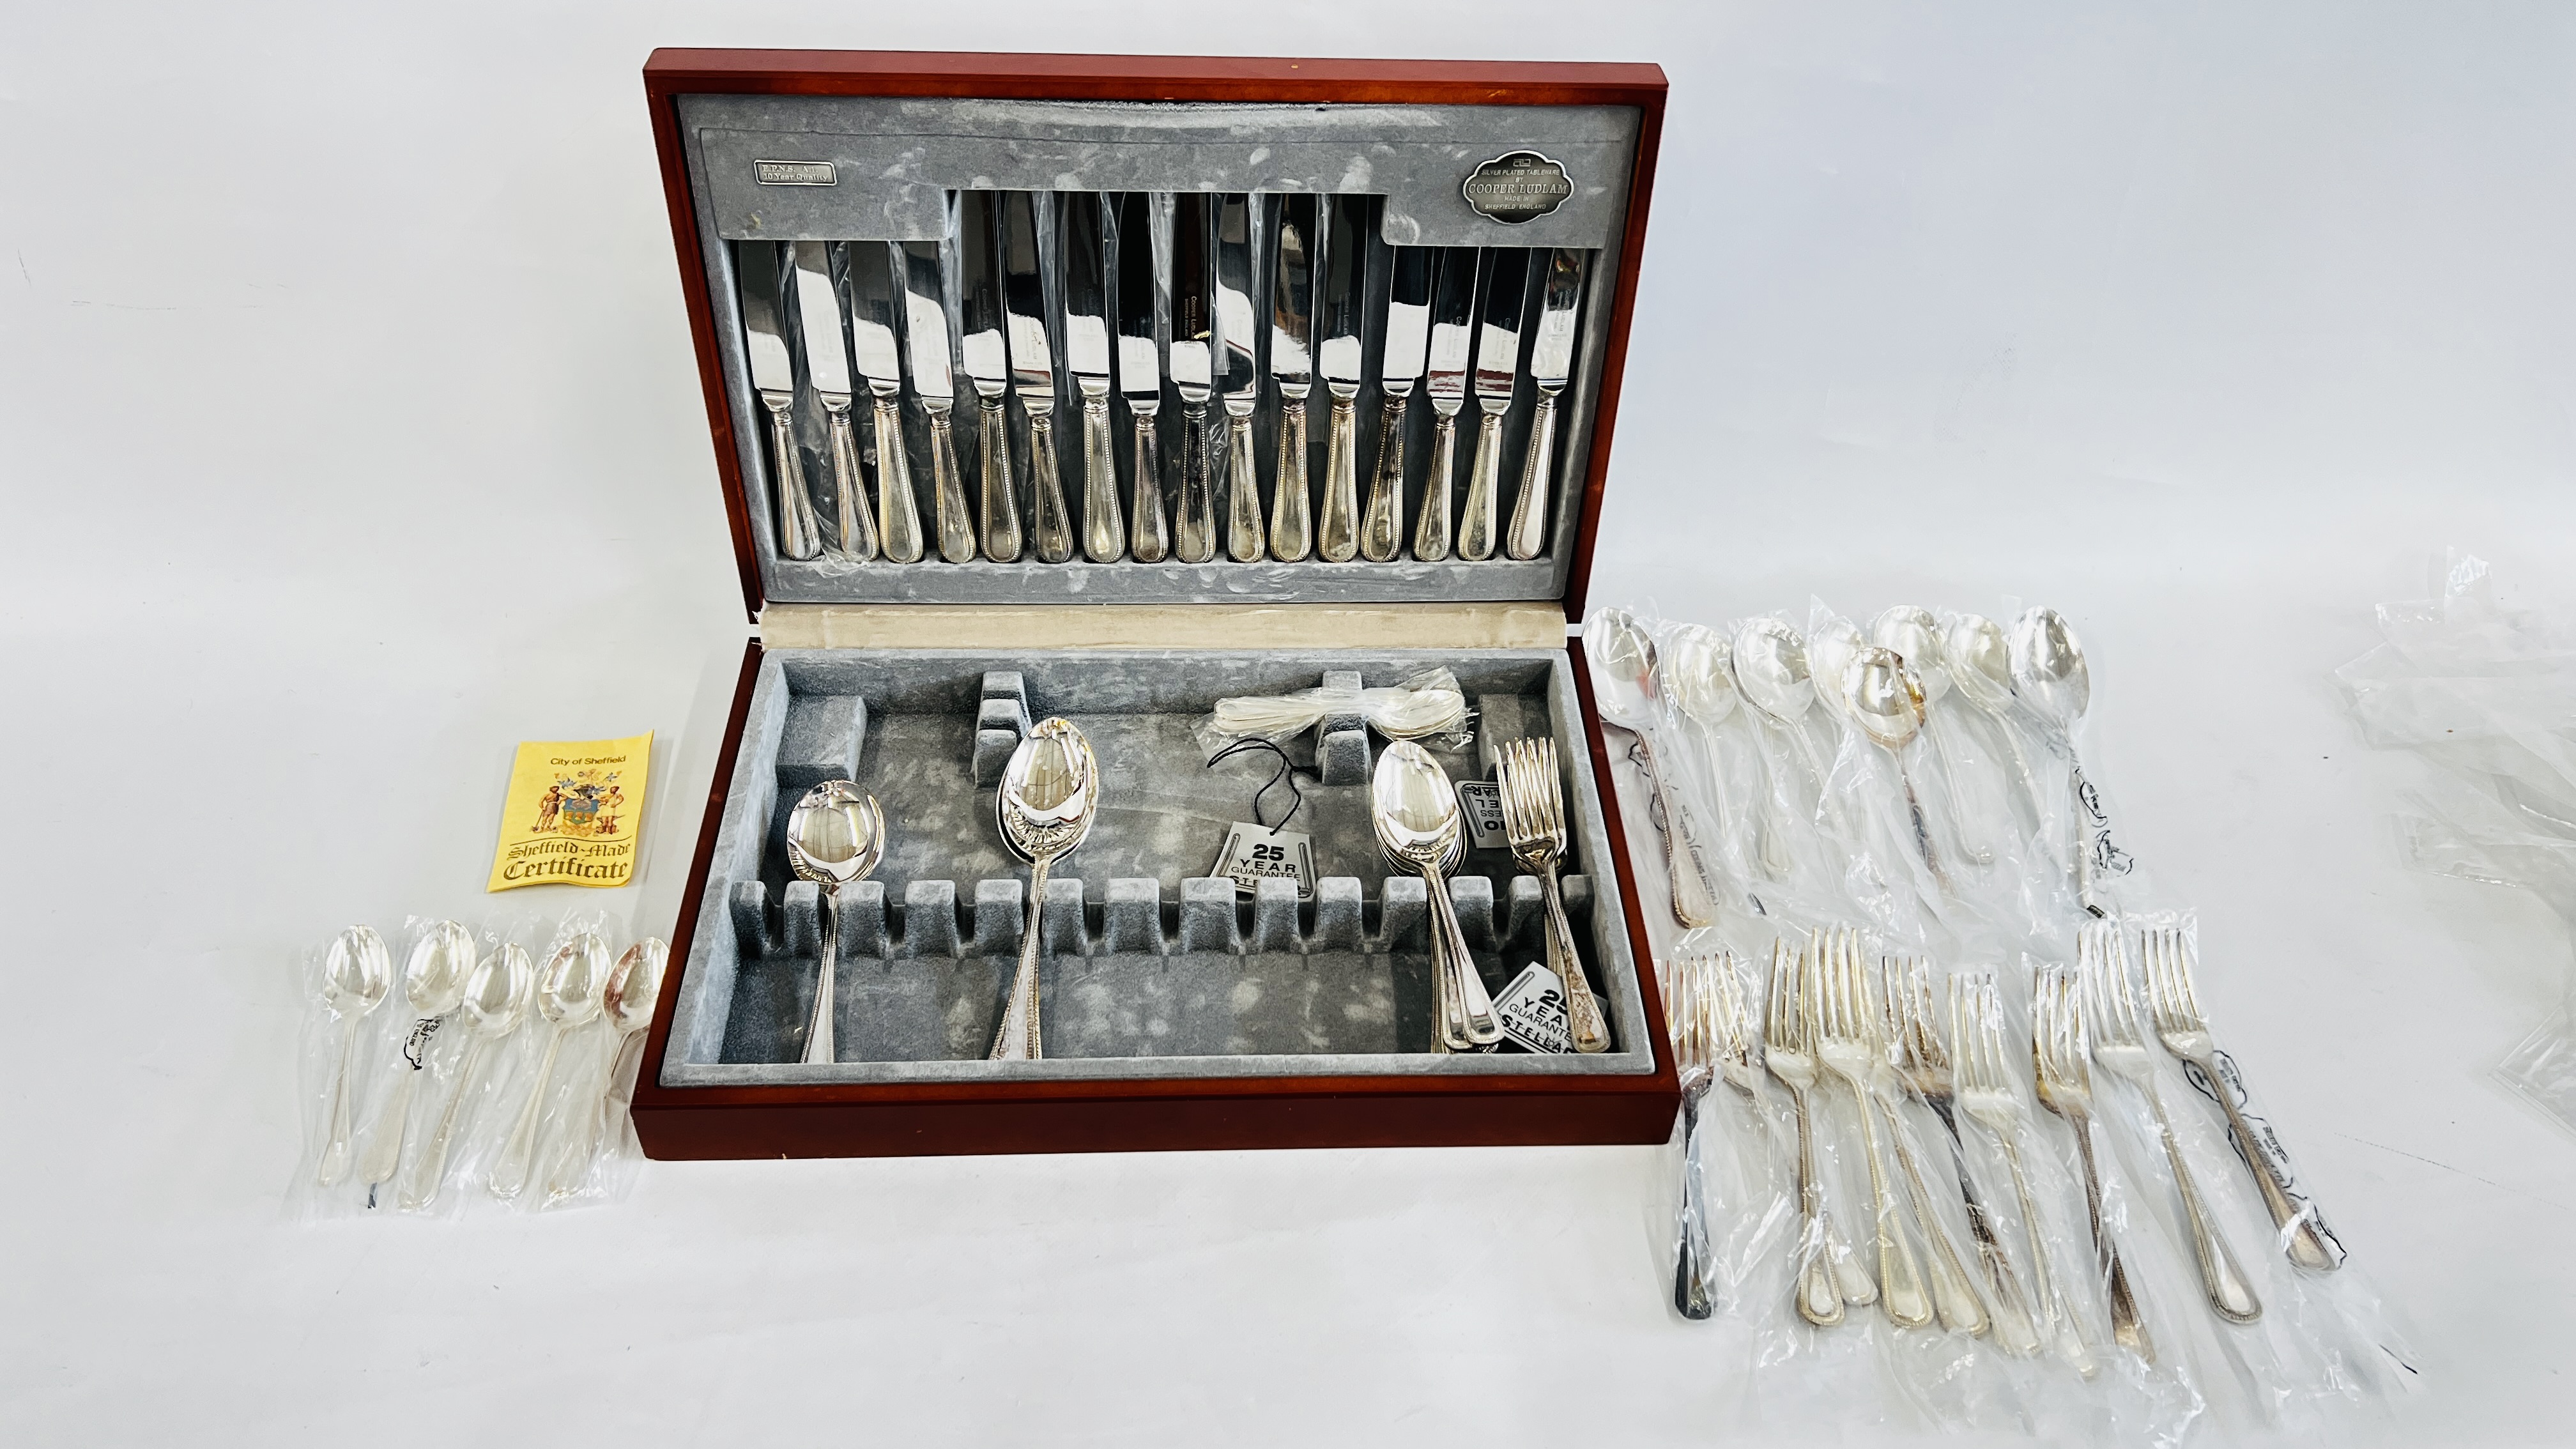 A CASED CANTEEN OF CUTLERY BY COOPER LUDLAM.